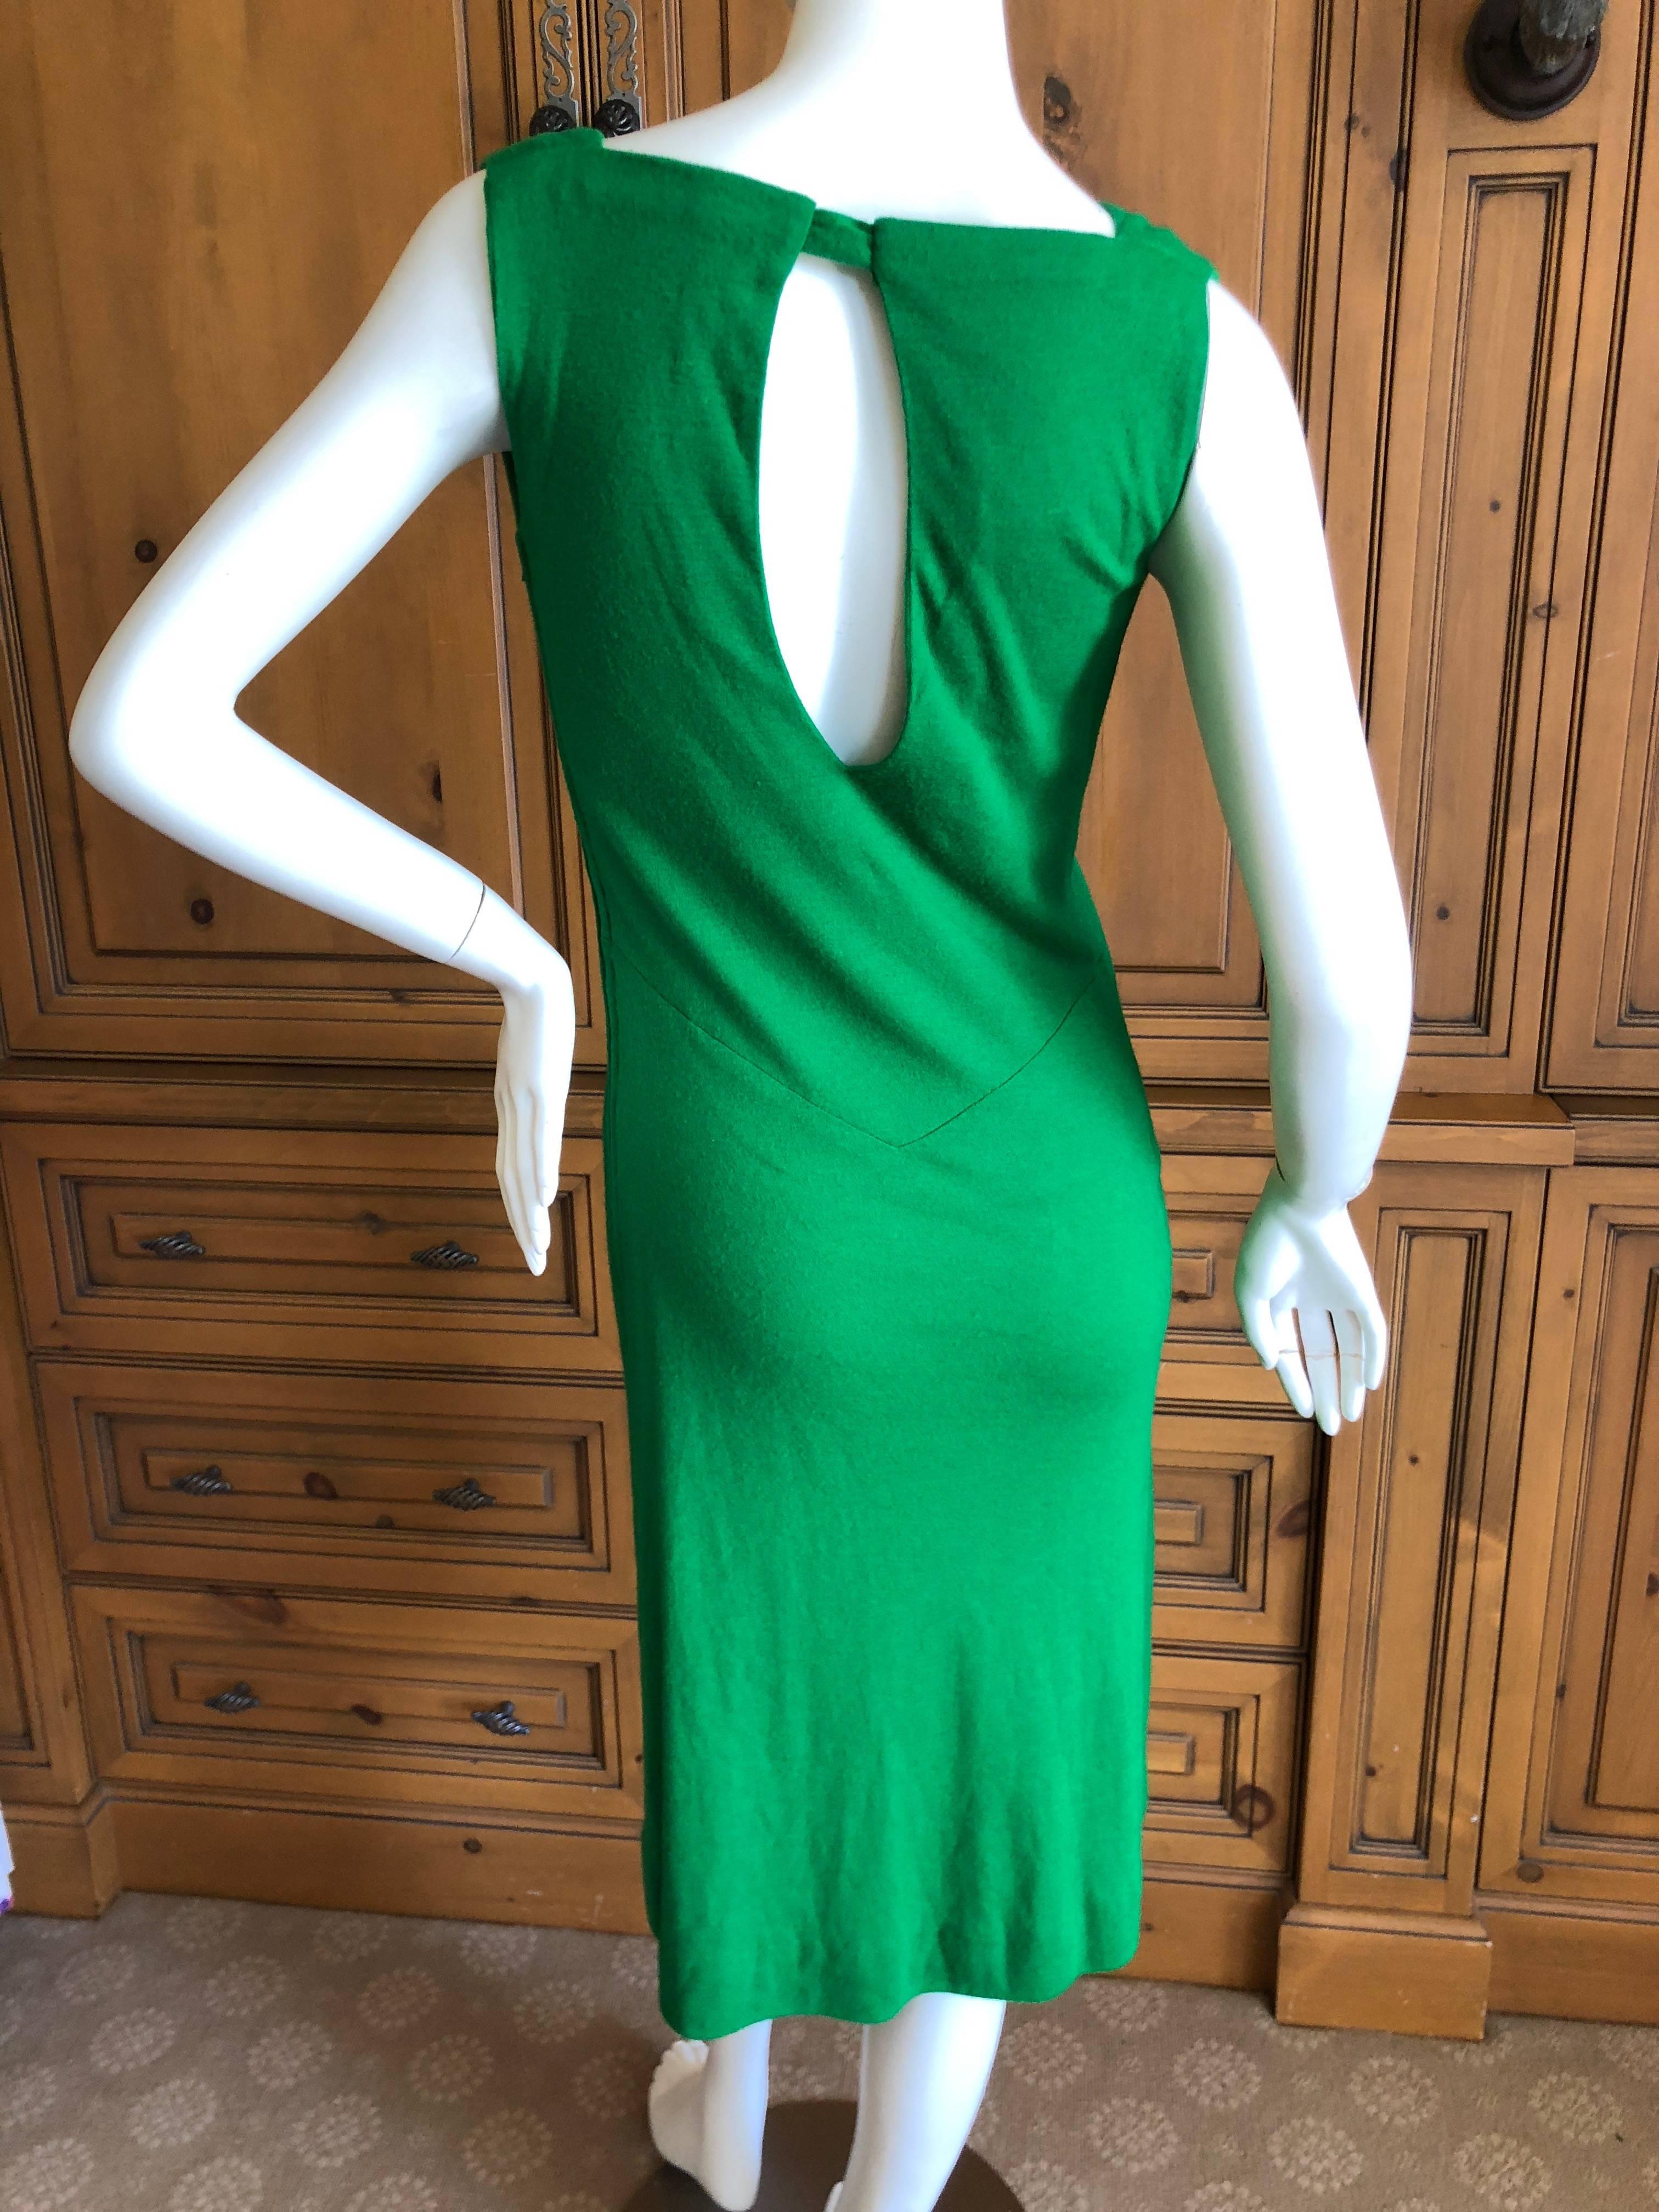 Cardinali Luxurious Lime Green Cashmere Dress and Matching Cape For Sale 4